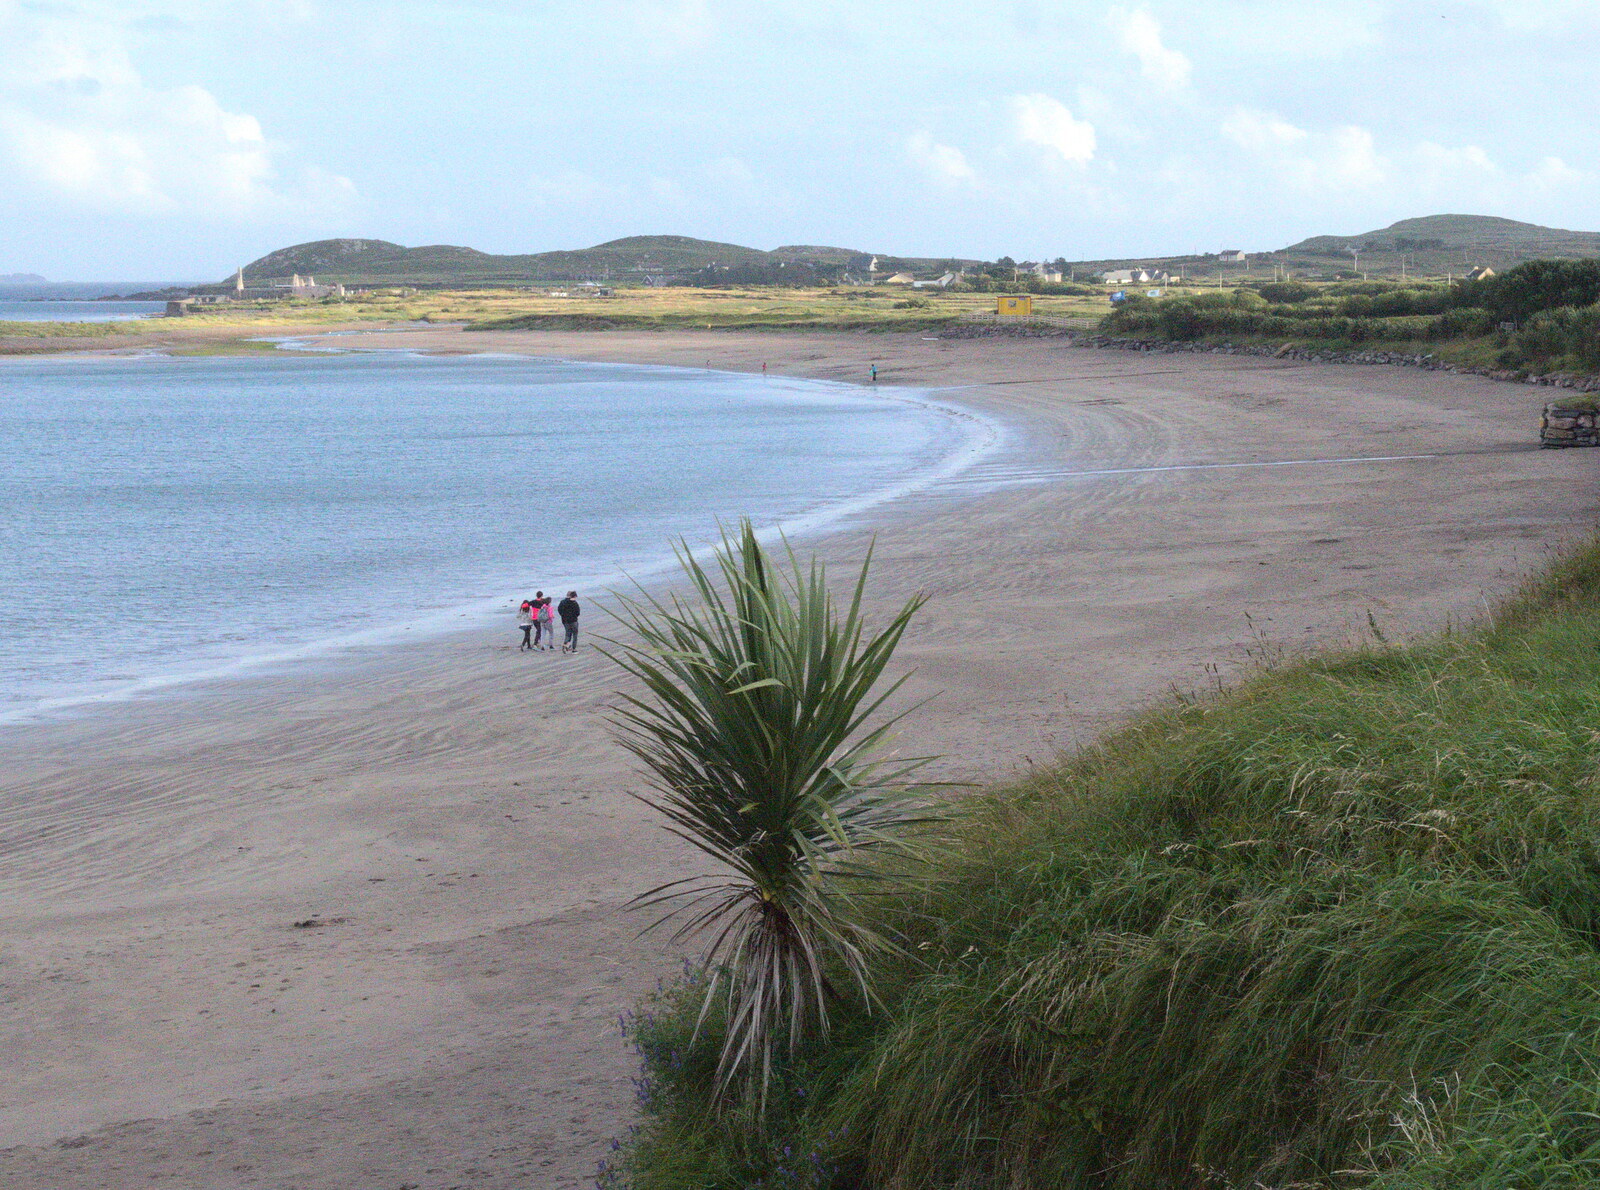 There are palm trees on the beach and everything from Liverpool to Baile an Sceilg, County Kerry, Ireland - 30th July 2017